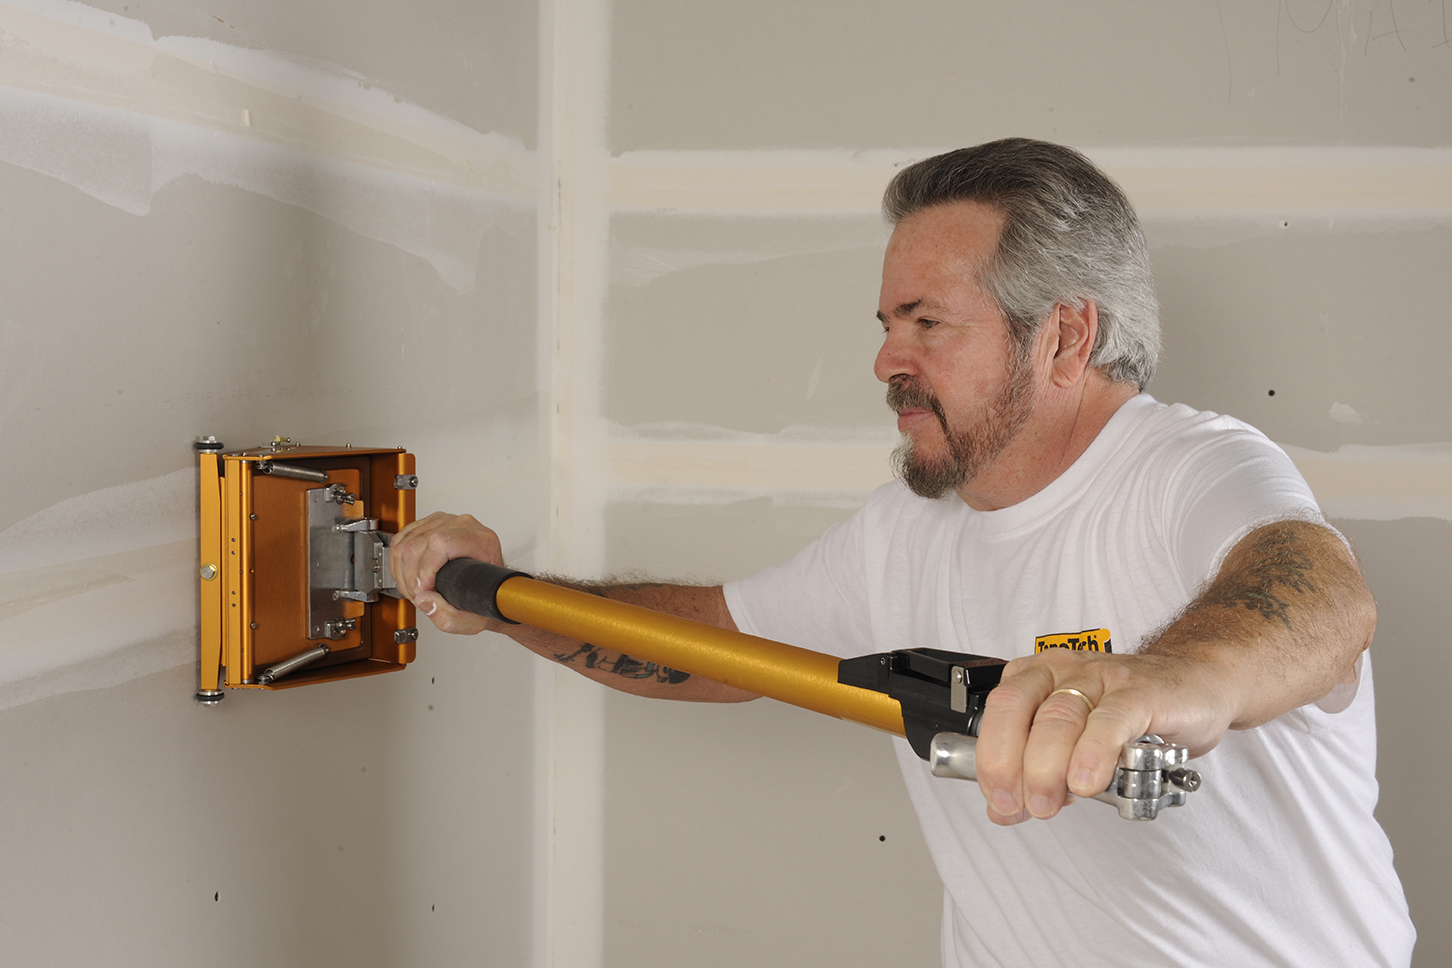 How To Use A Drywall Flat Box